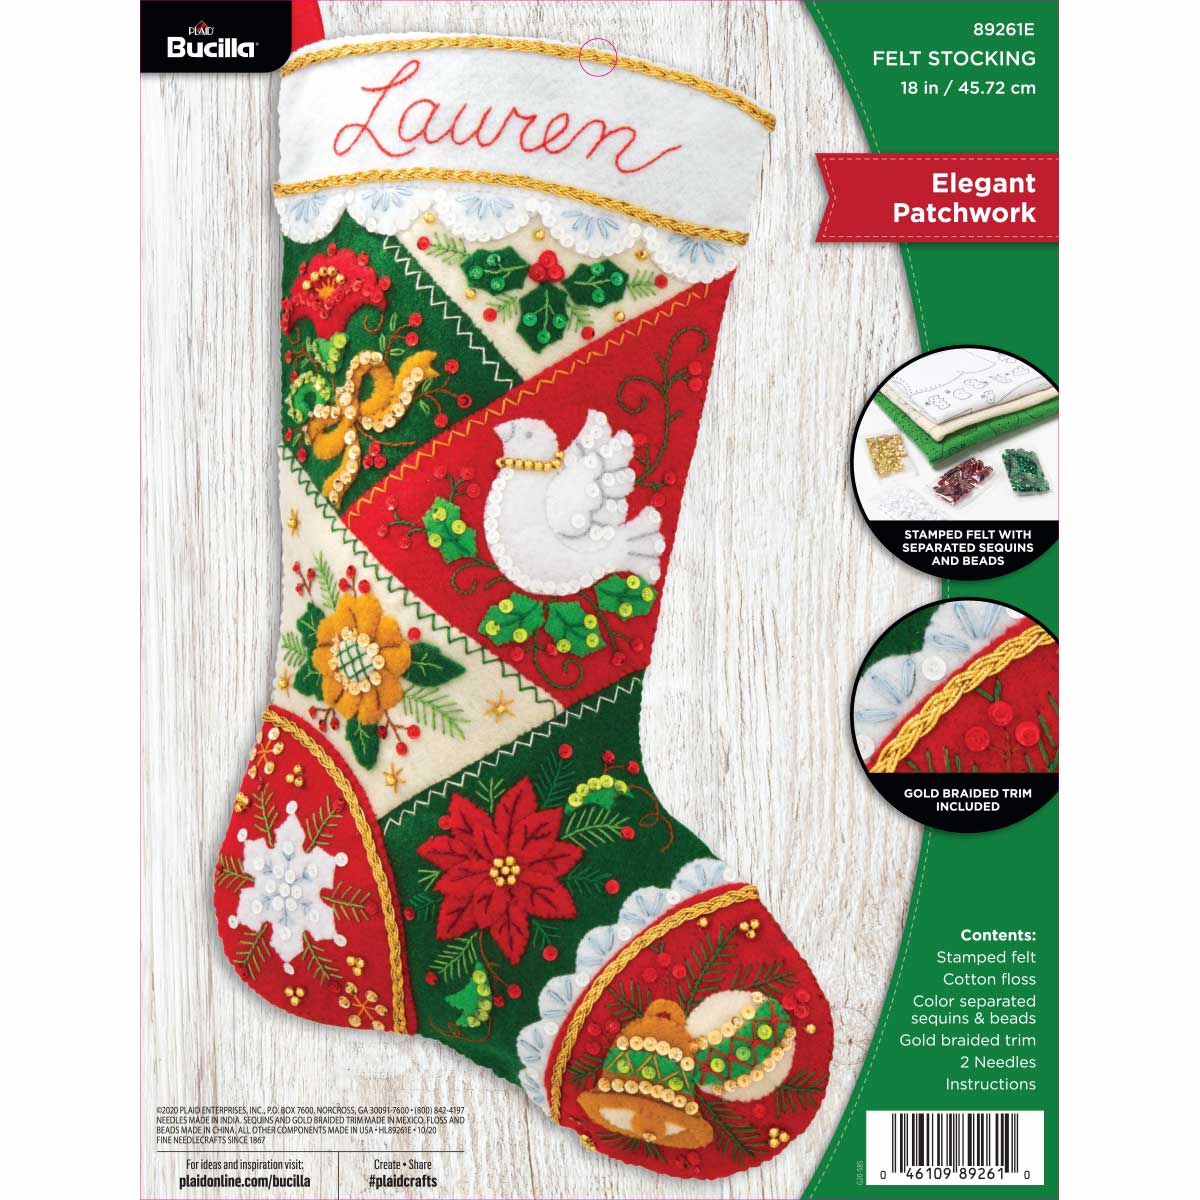 Multicolor Melrose 80749 Polyester Christmas Stocking Decor 19-inch Height